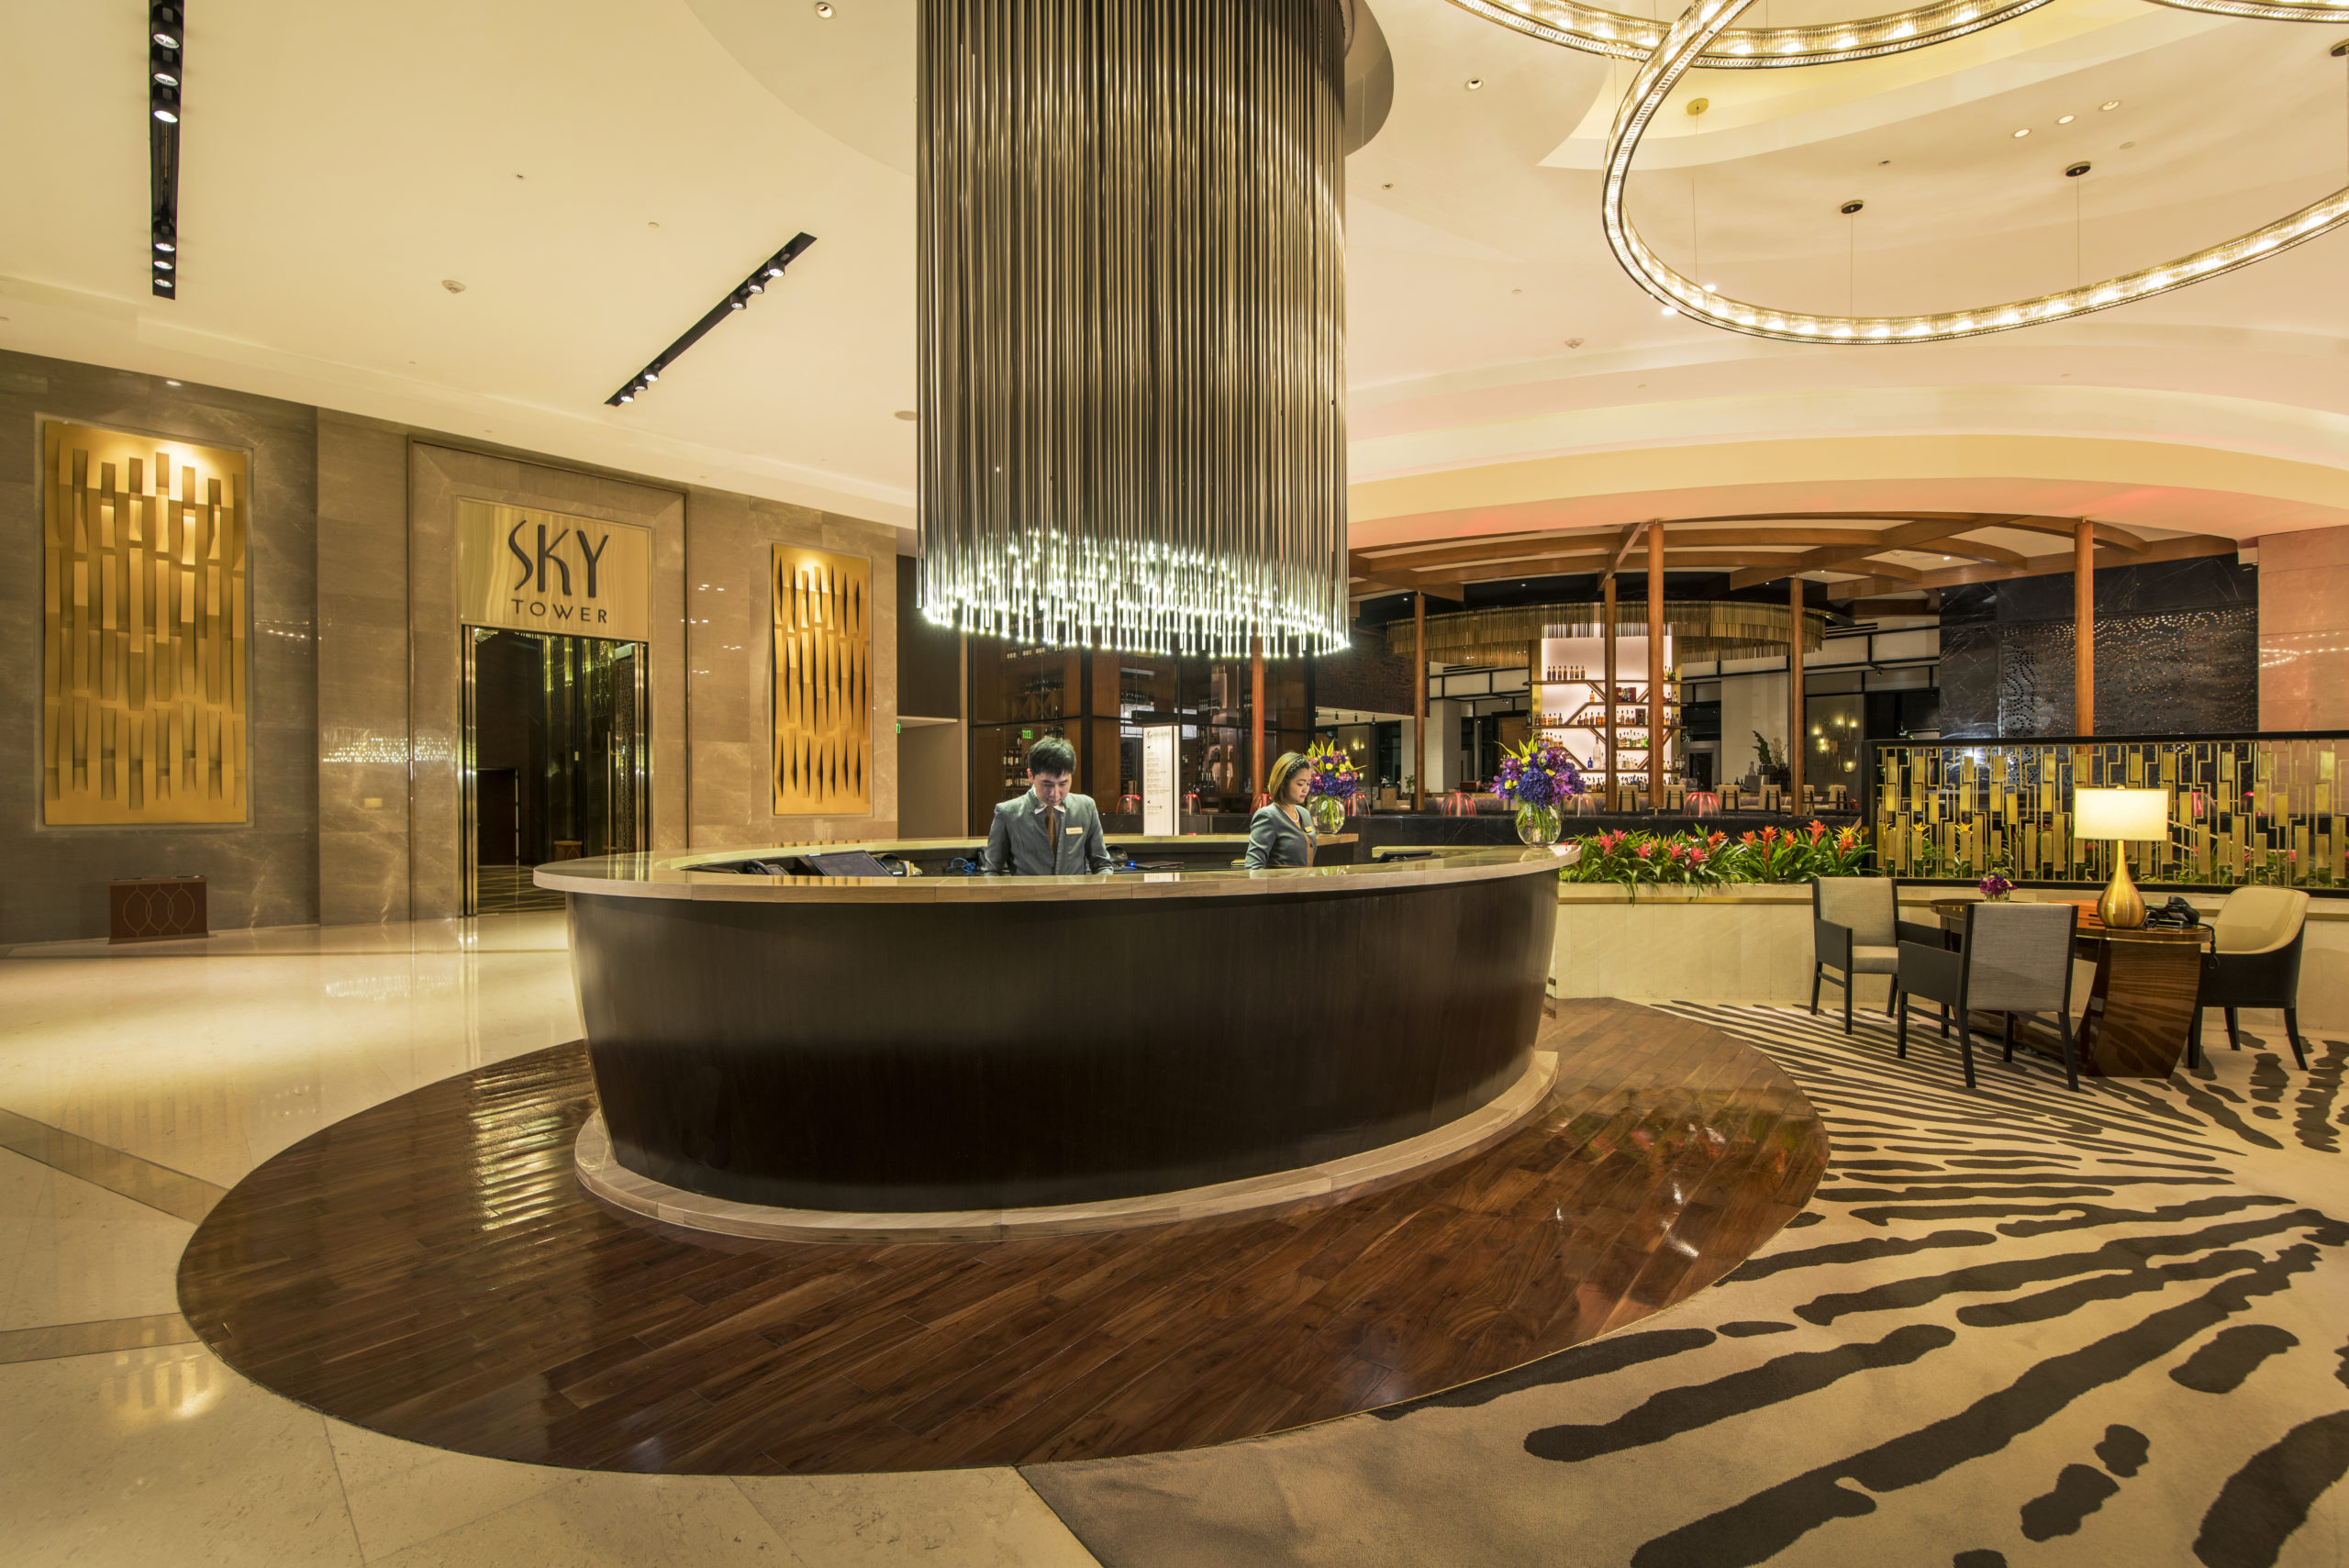 The Stars welcome you at Solaire